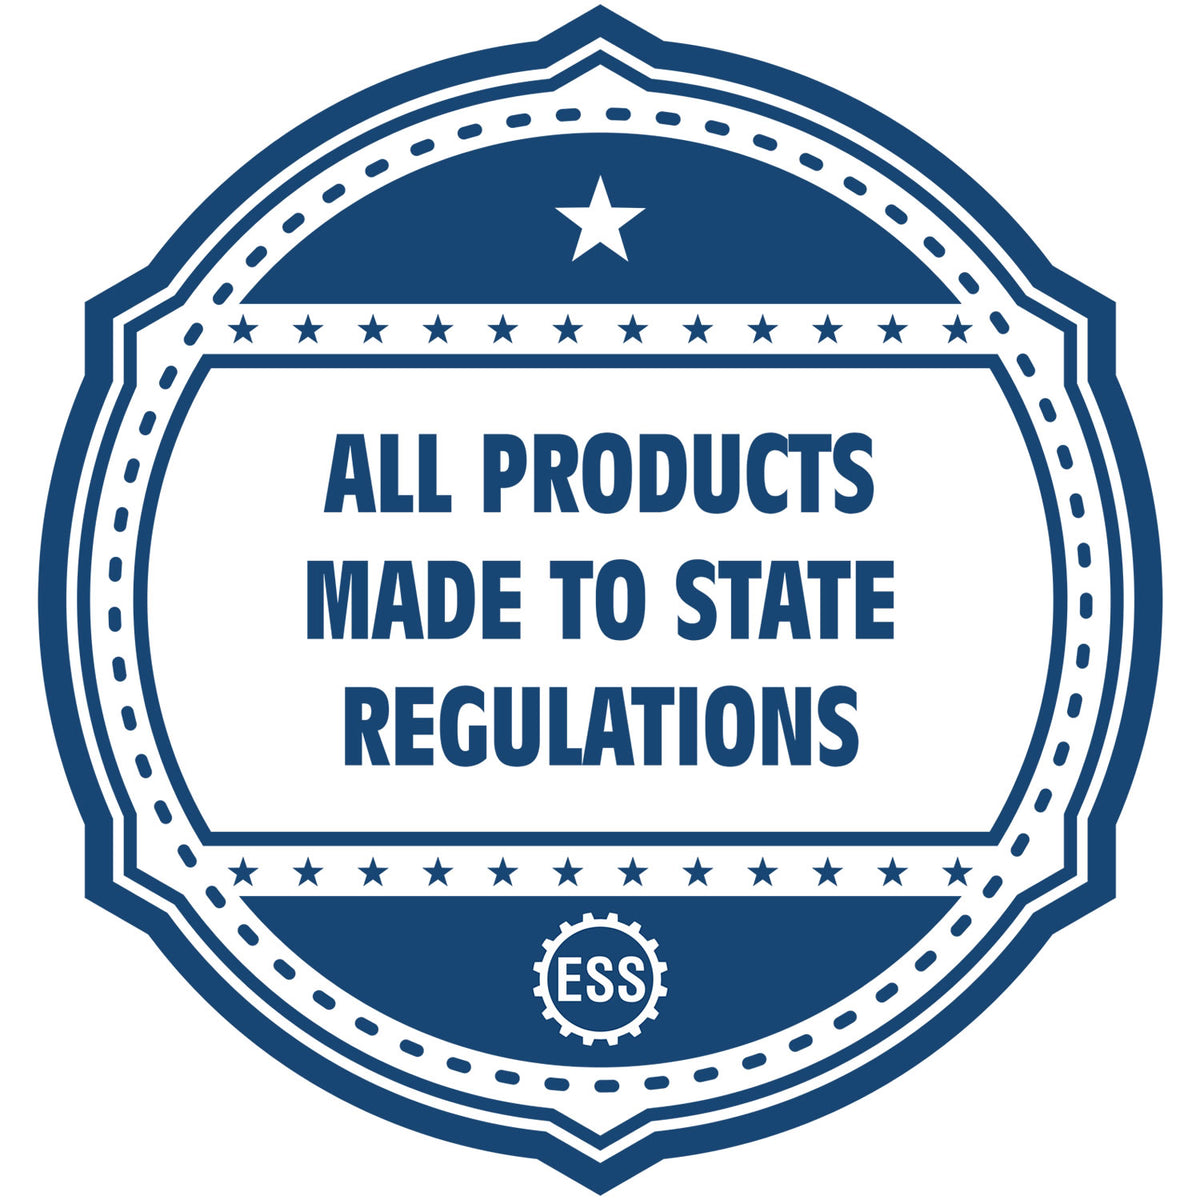 An icon or badge element for the Heavy Duty Cast Iron Michigan Engineer Seal Embosser showing that this product is made in compliance with state regulations.